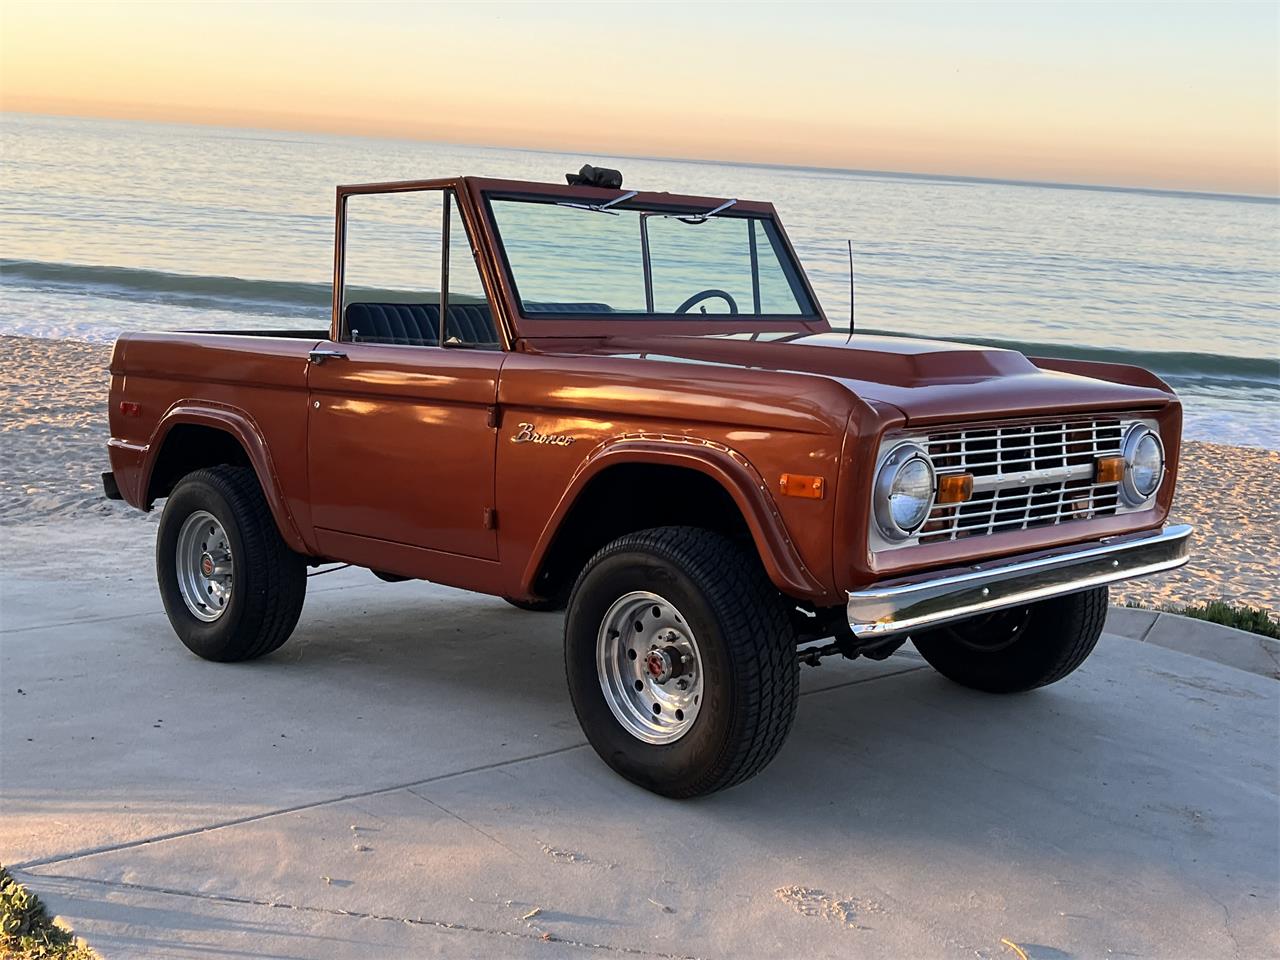 1974 Ford Bronco in Pacific Palisades, California